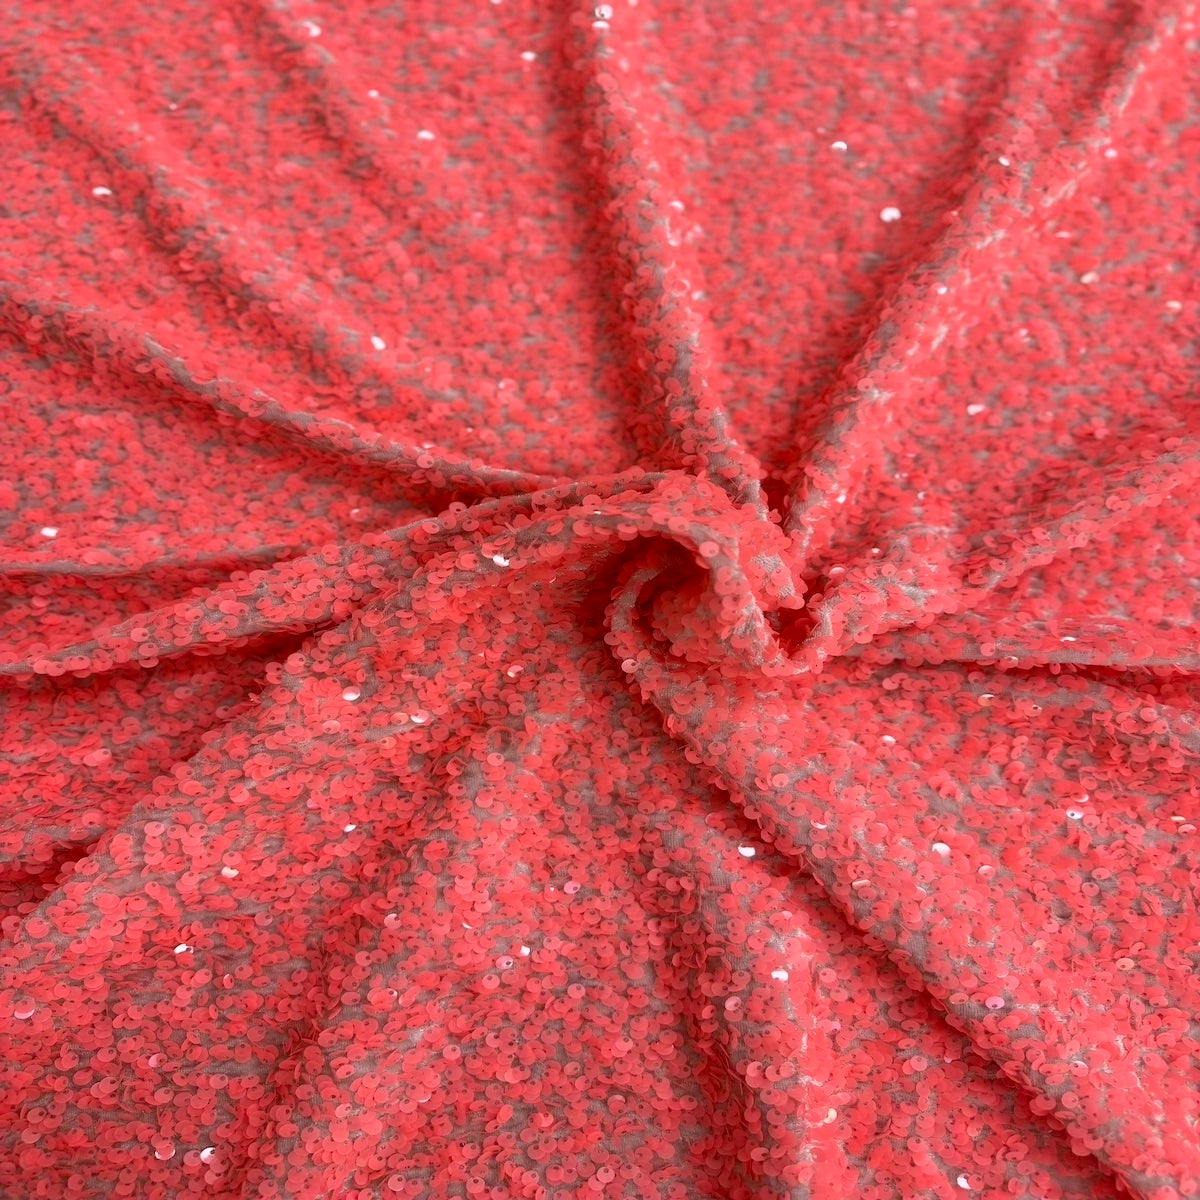 Coral Pink Sequins Embroidered Stretch Velvet Rodeo Fabric